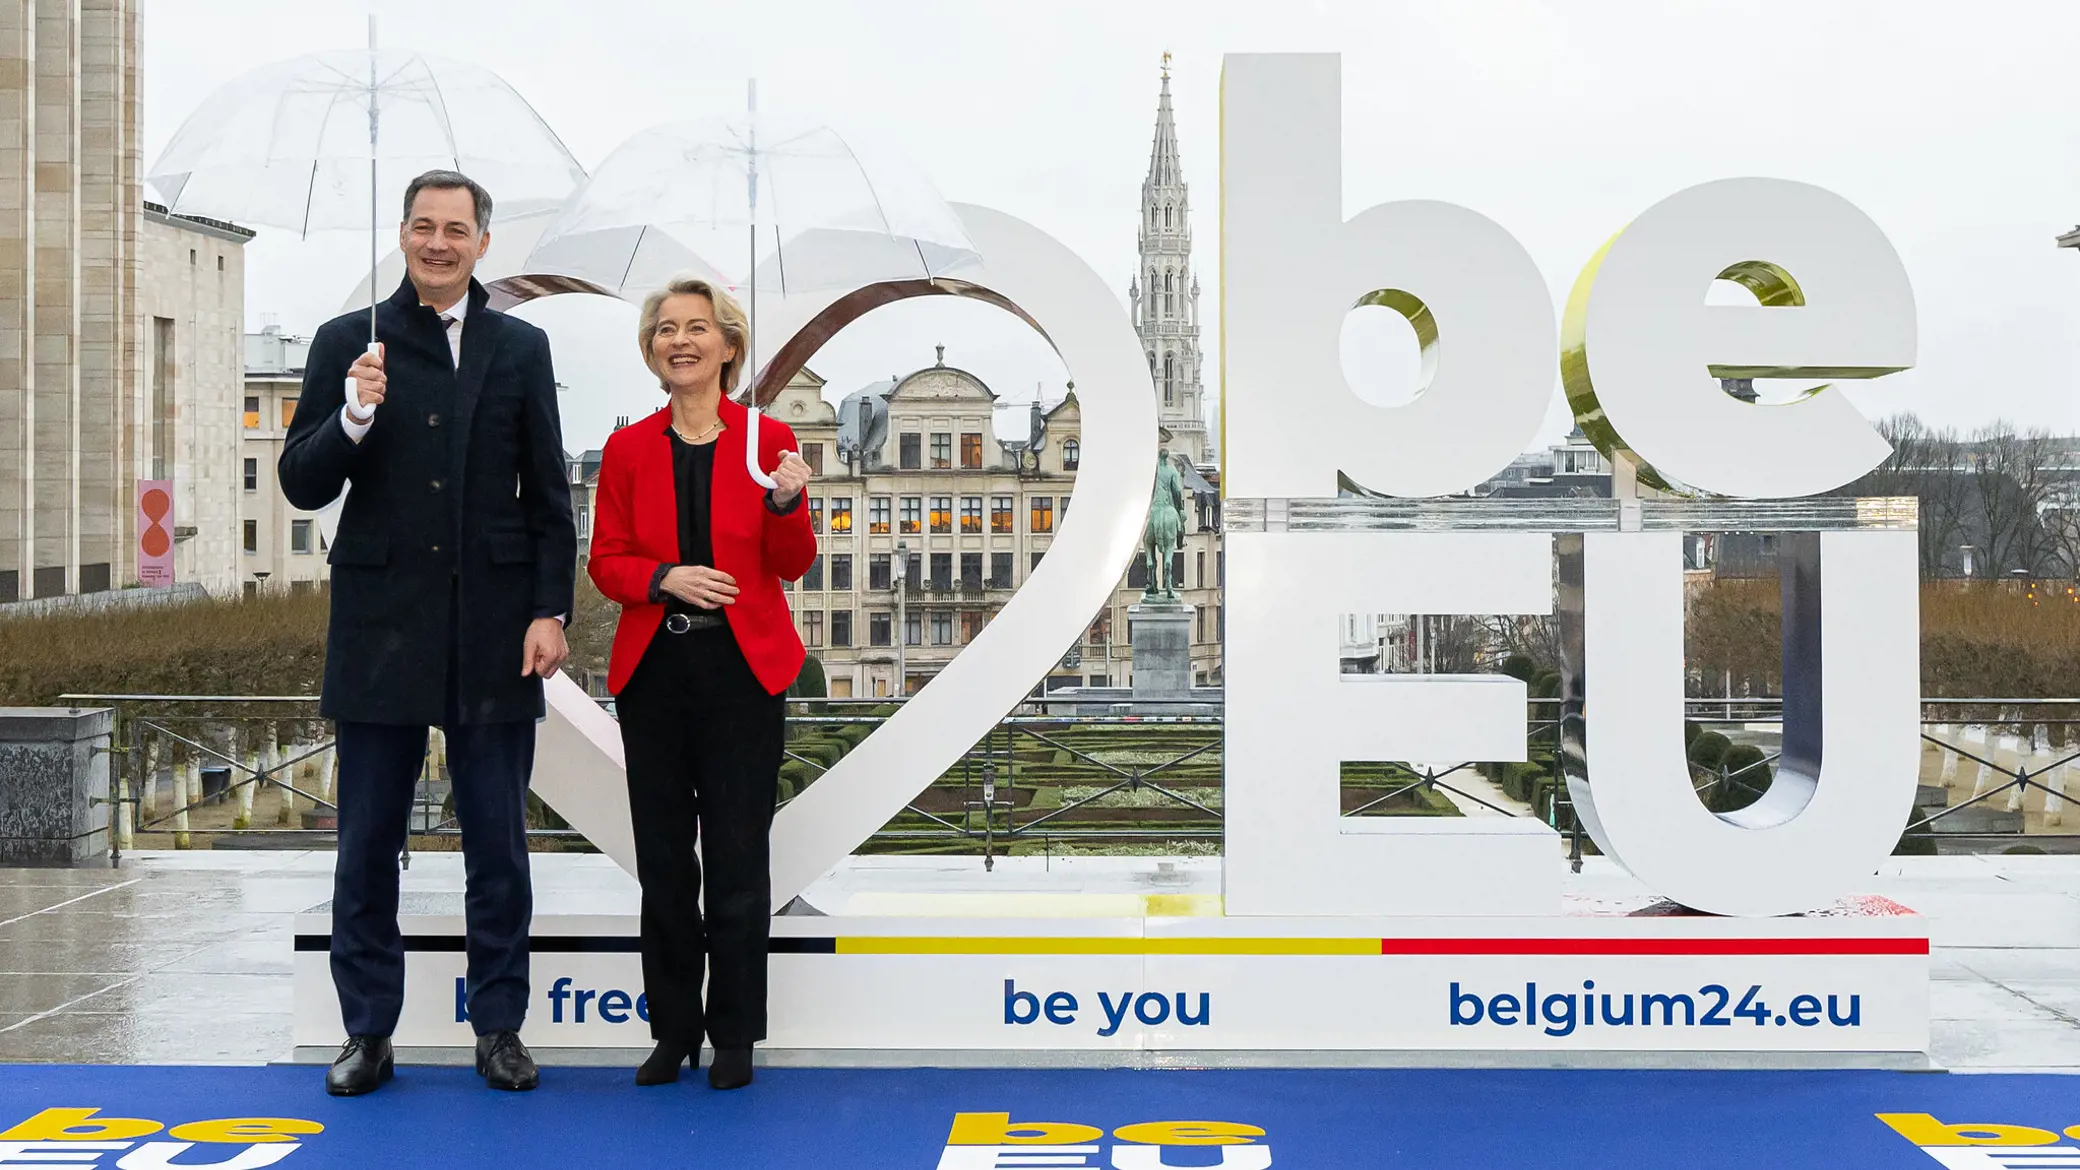 New Year, New Presidency; What does Belgium have in store for Entrepreneurship and Inclusion during its presidency of the Council of the EU?